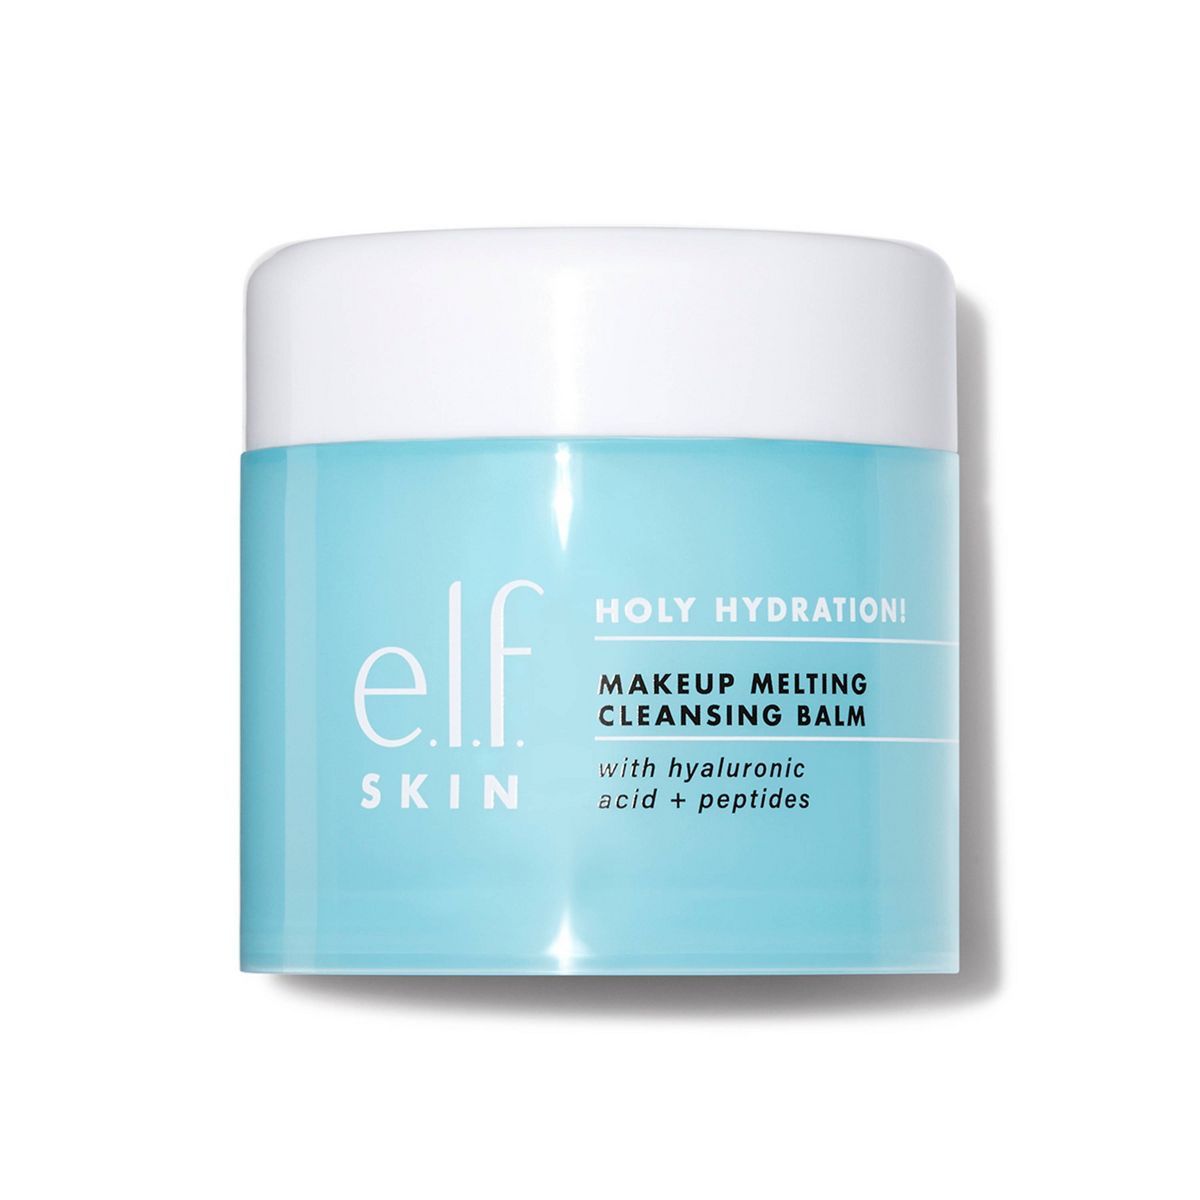 e.l.f. Holy Hydration Makeup Melting Scented Cleansing Balm | Target